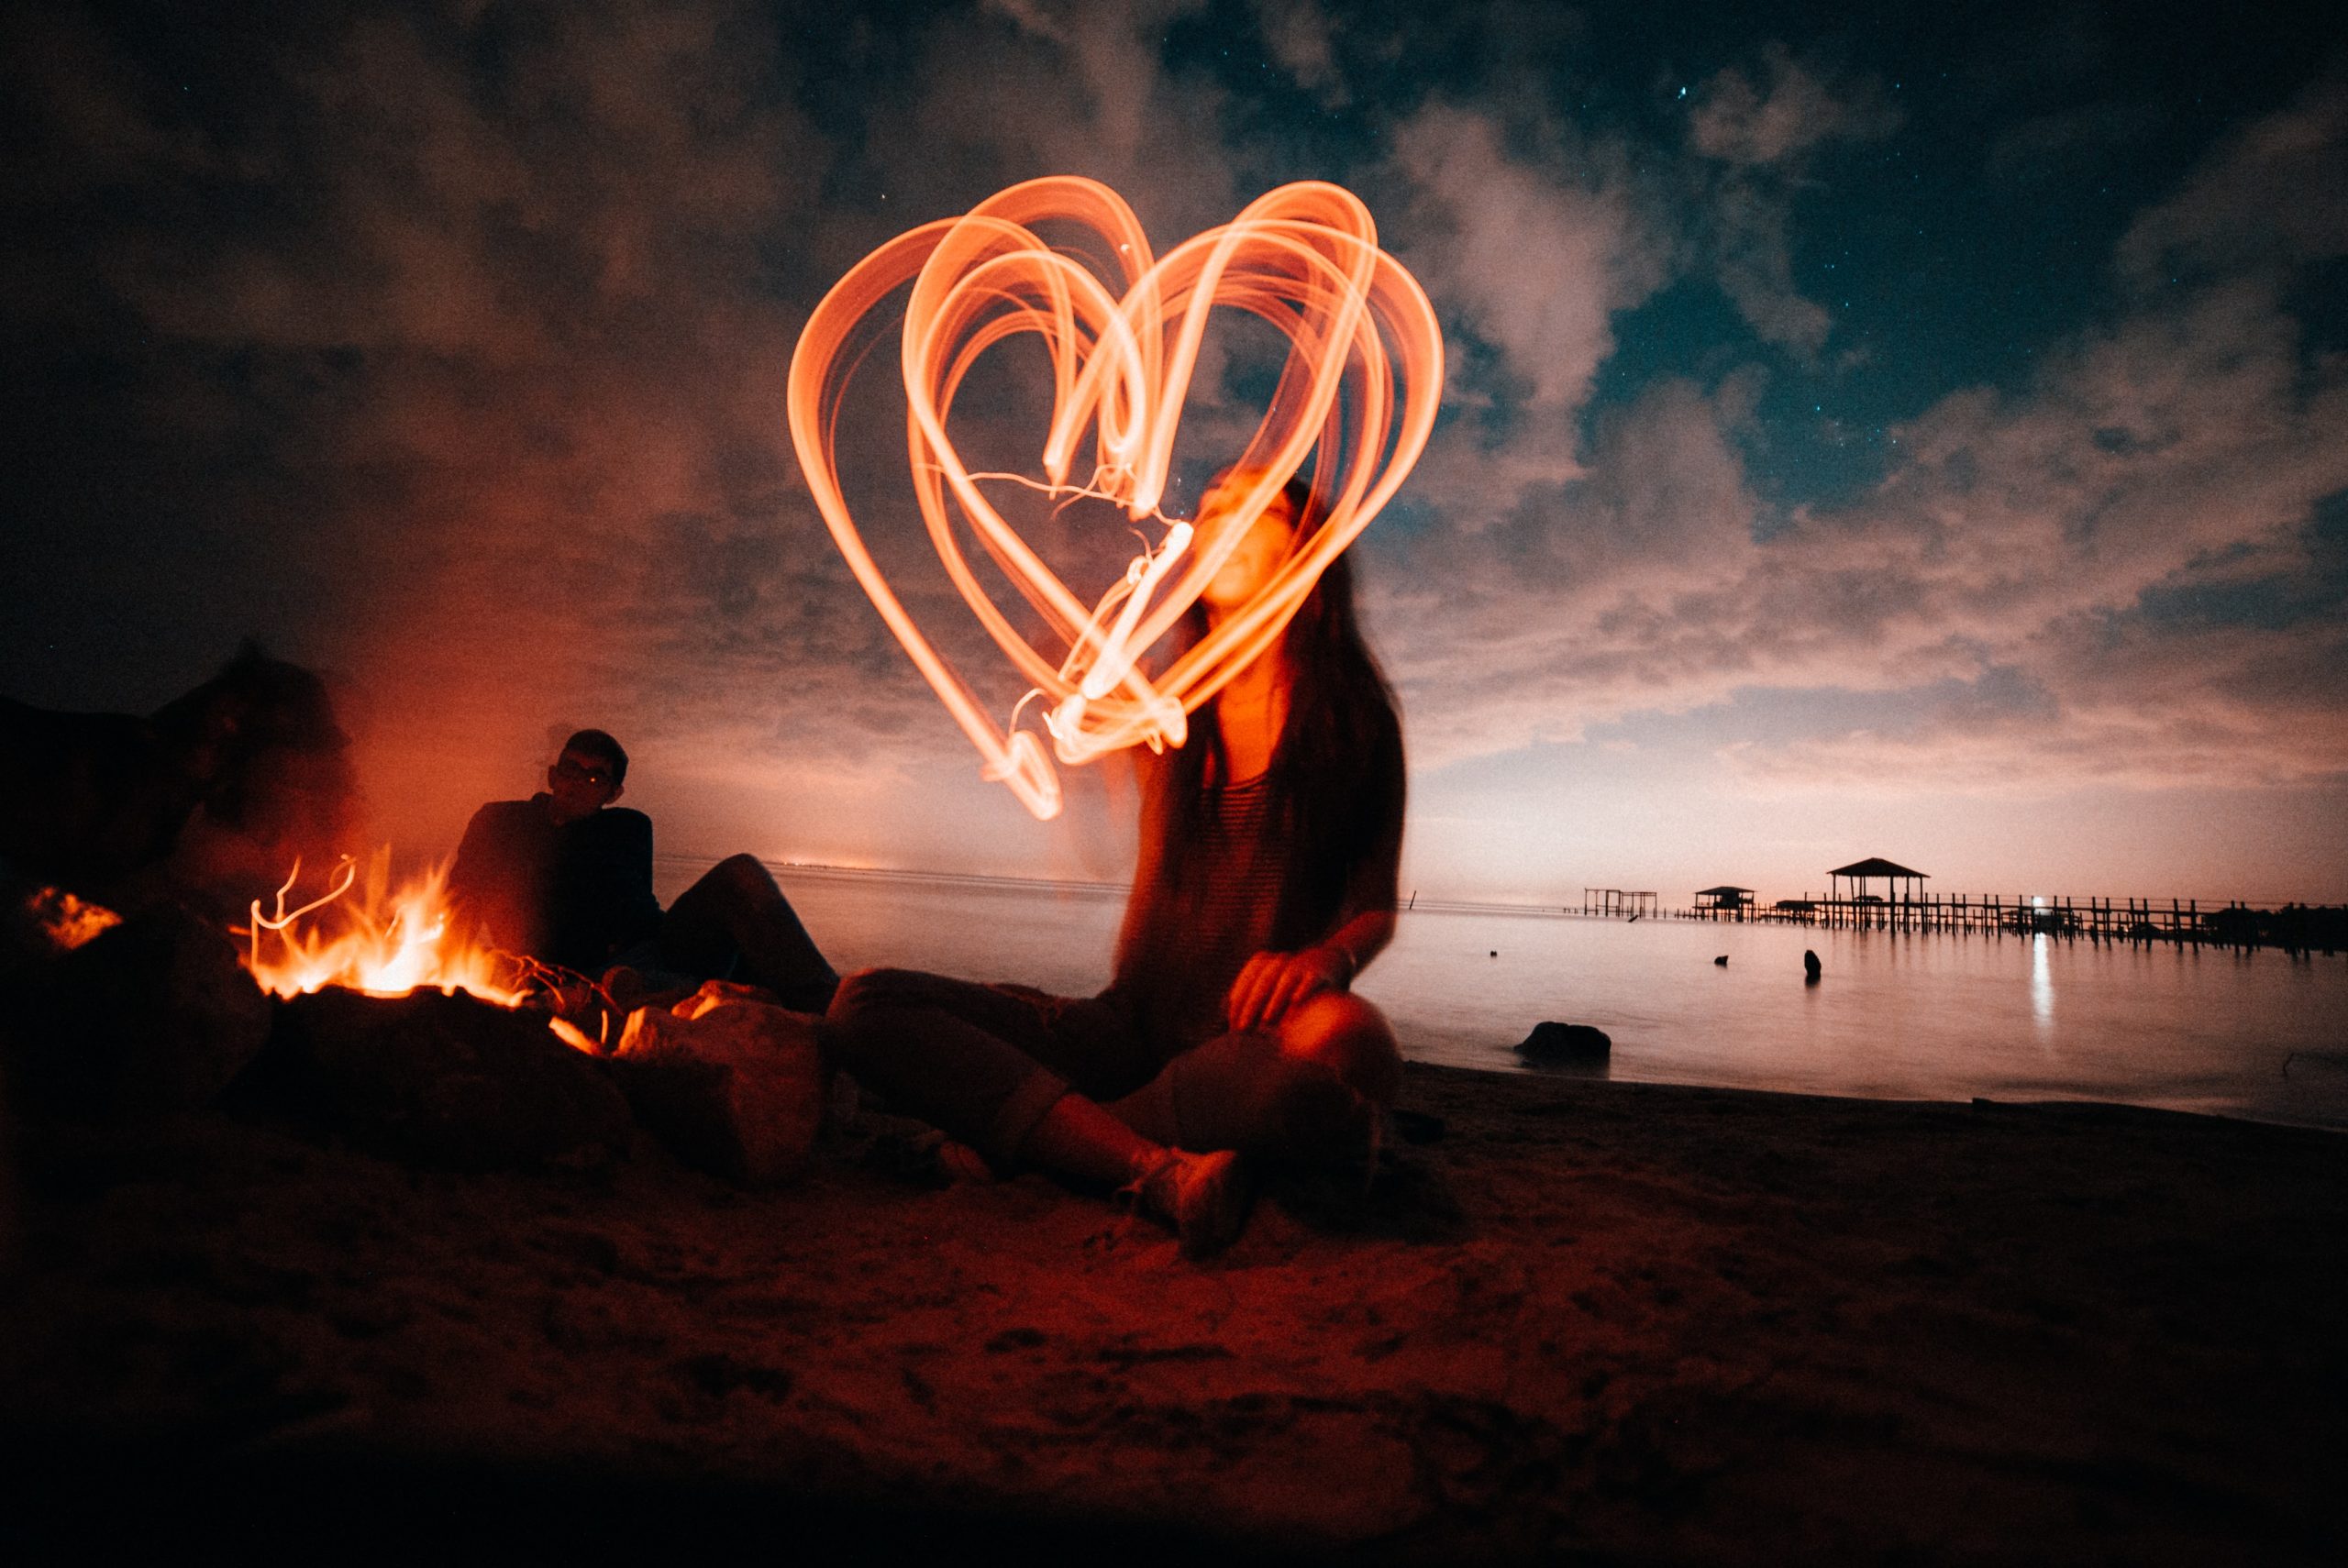 A long-exposure photo of a woman drawing a heart with a light source while seated on the beach.